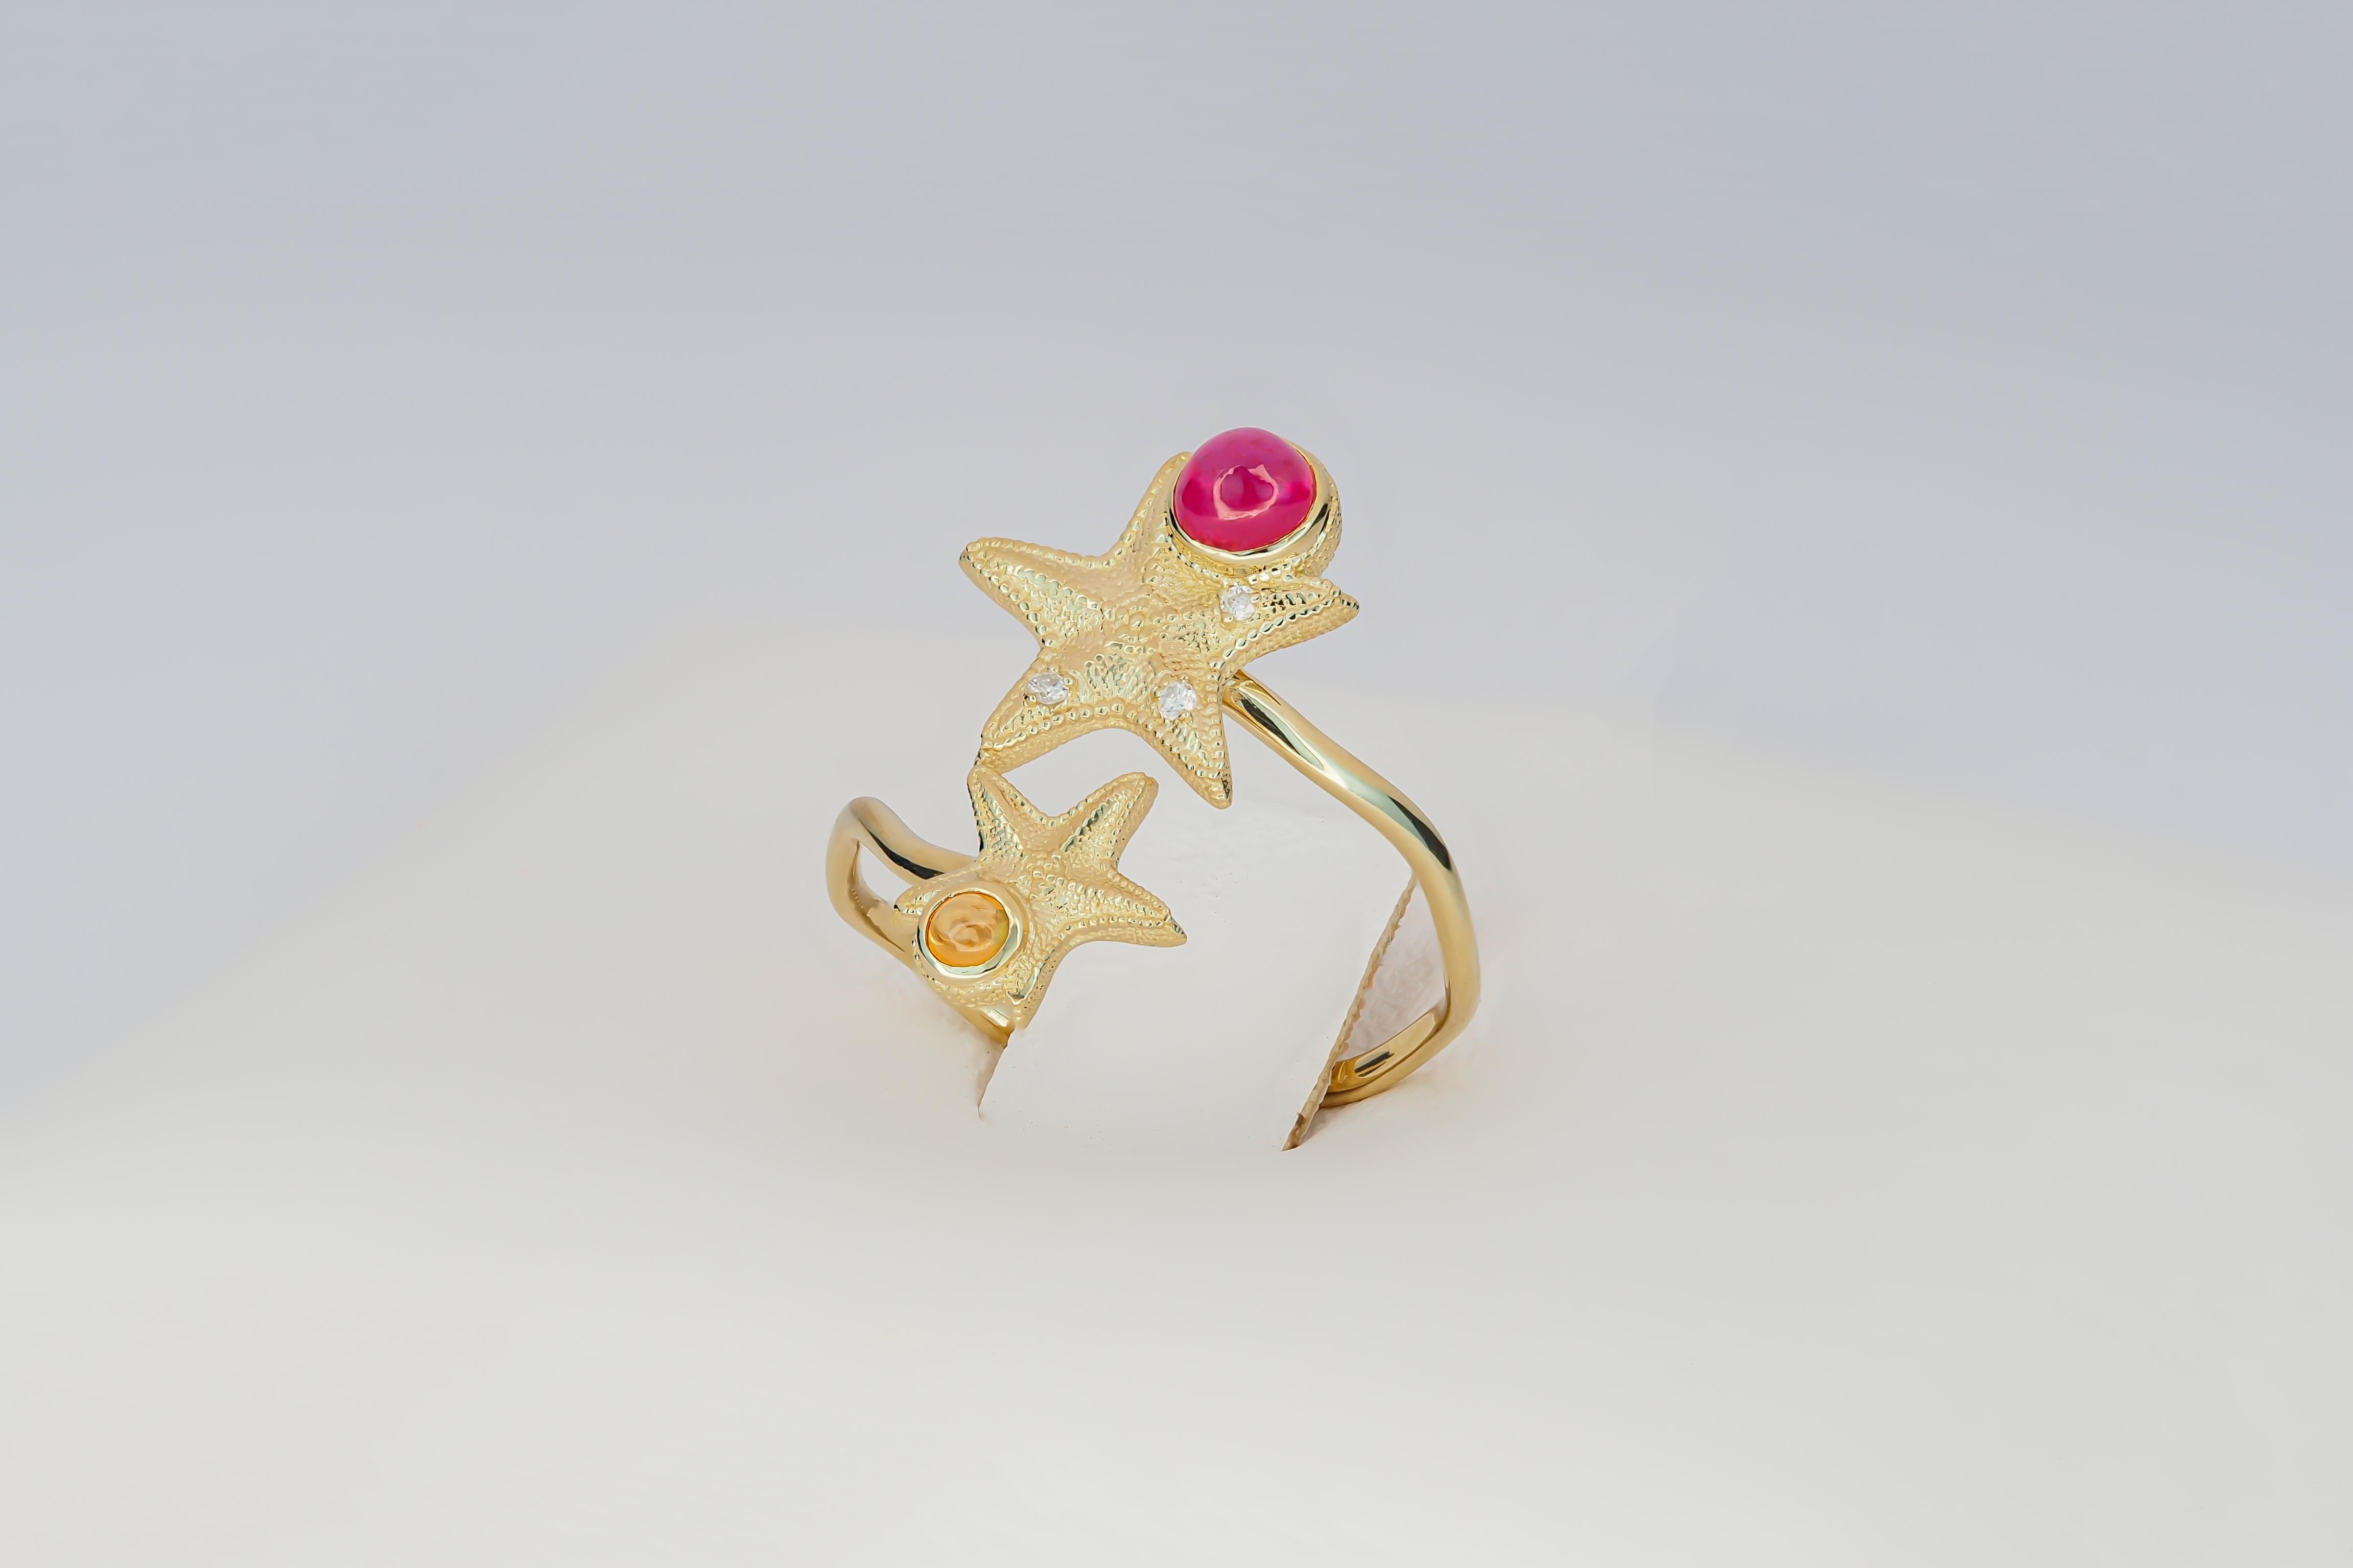 For Sale:   Ruby and Sapphire cabochon ring in 14 karat gold.  Star Fish Ring! 5